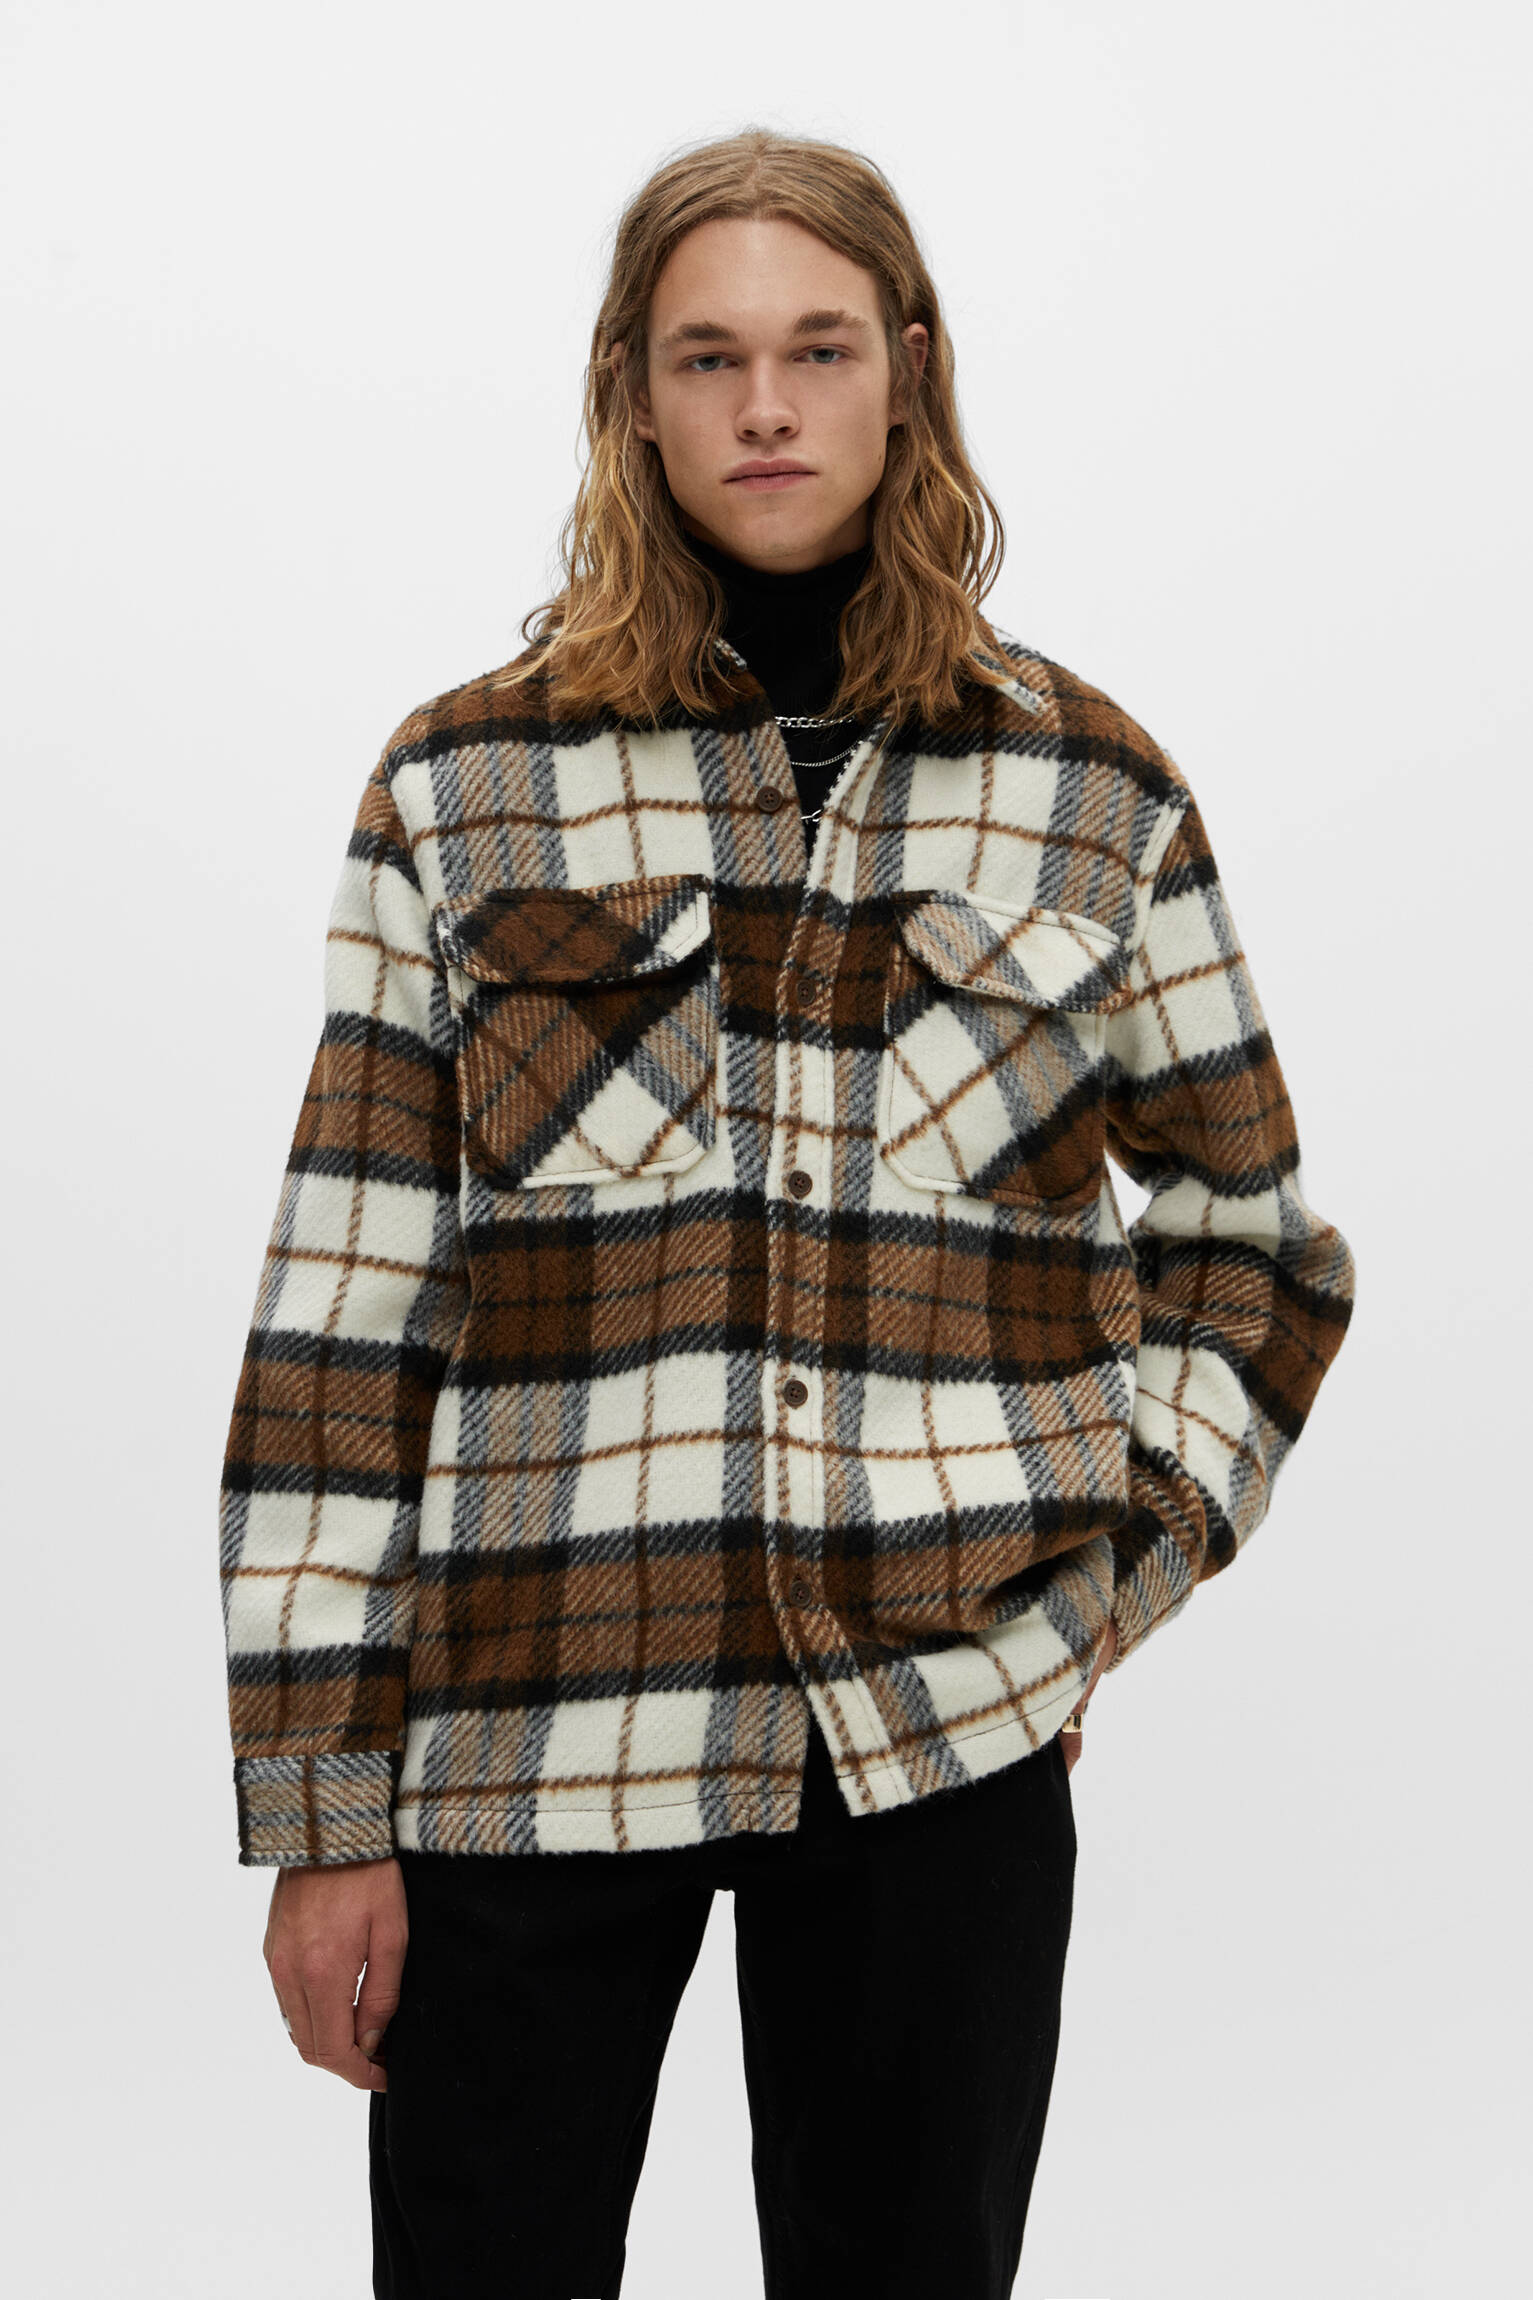 Pull&Bear plaid overshirt in brown